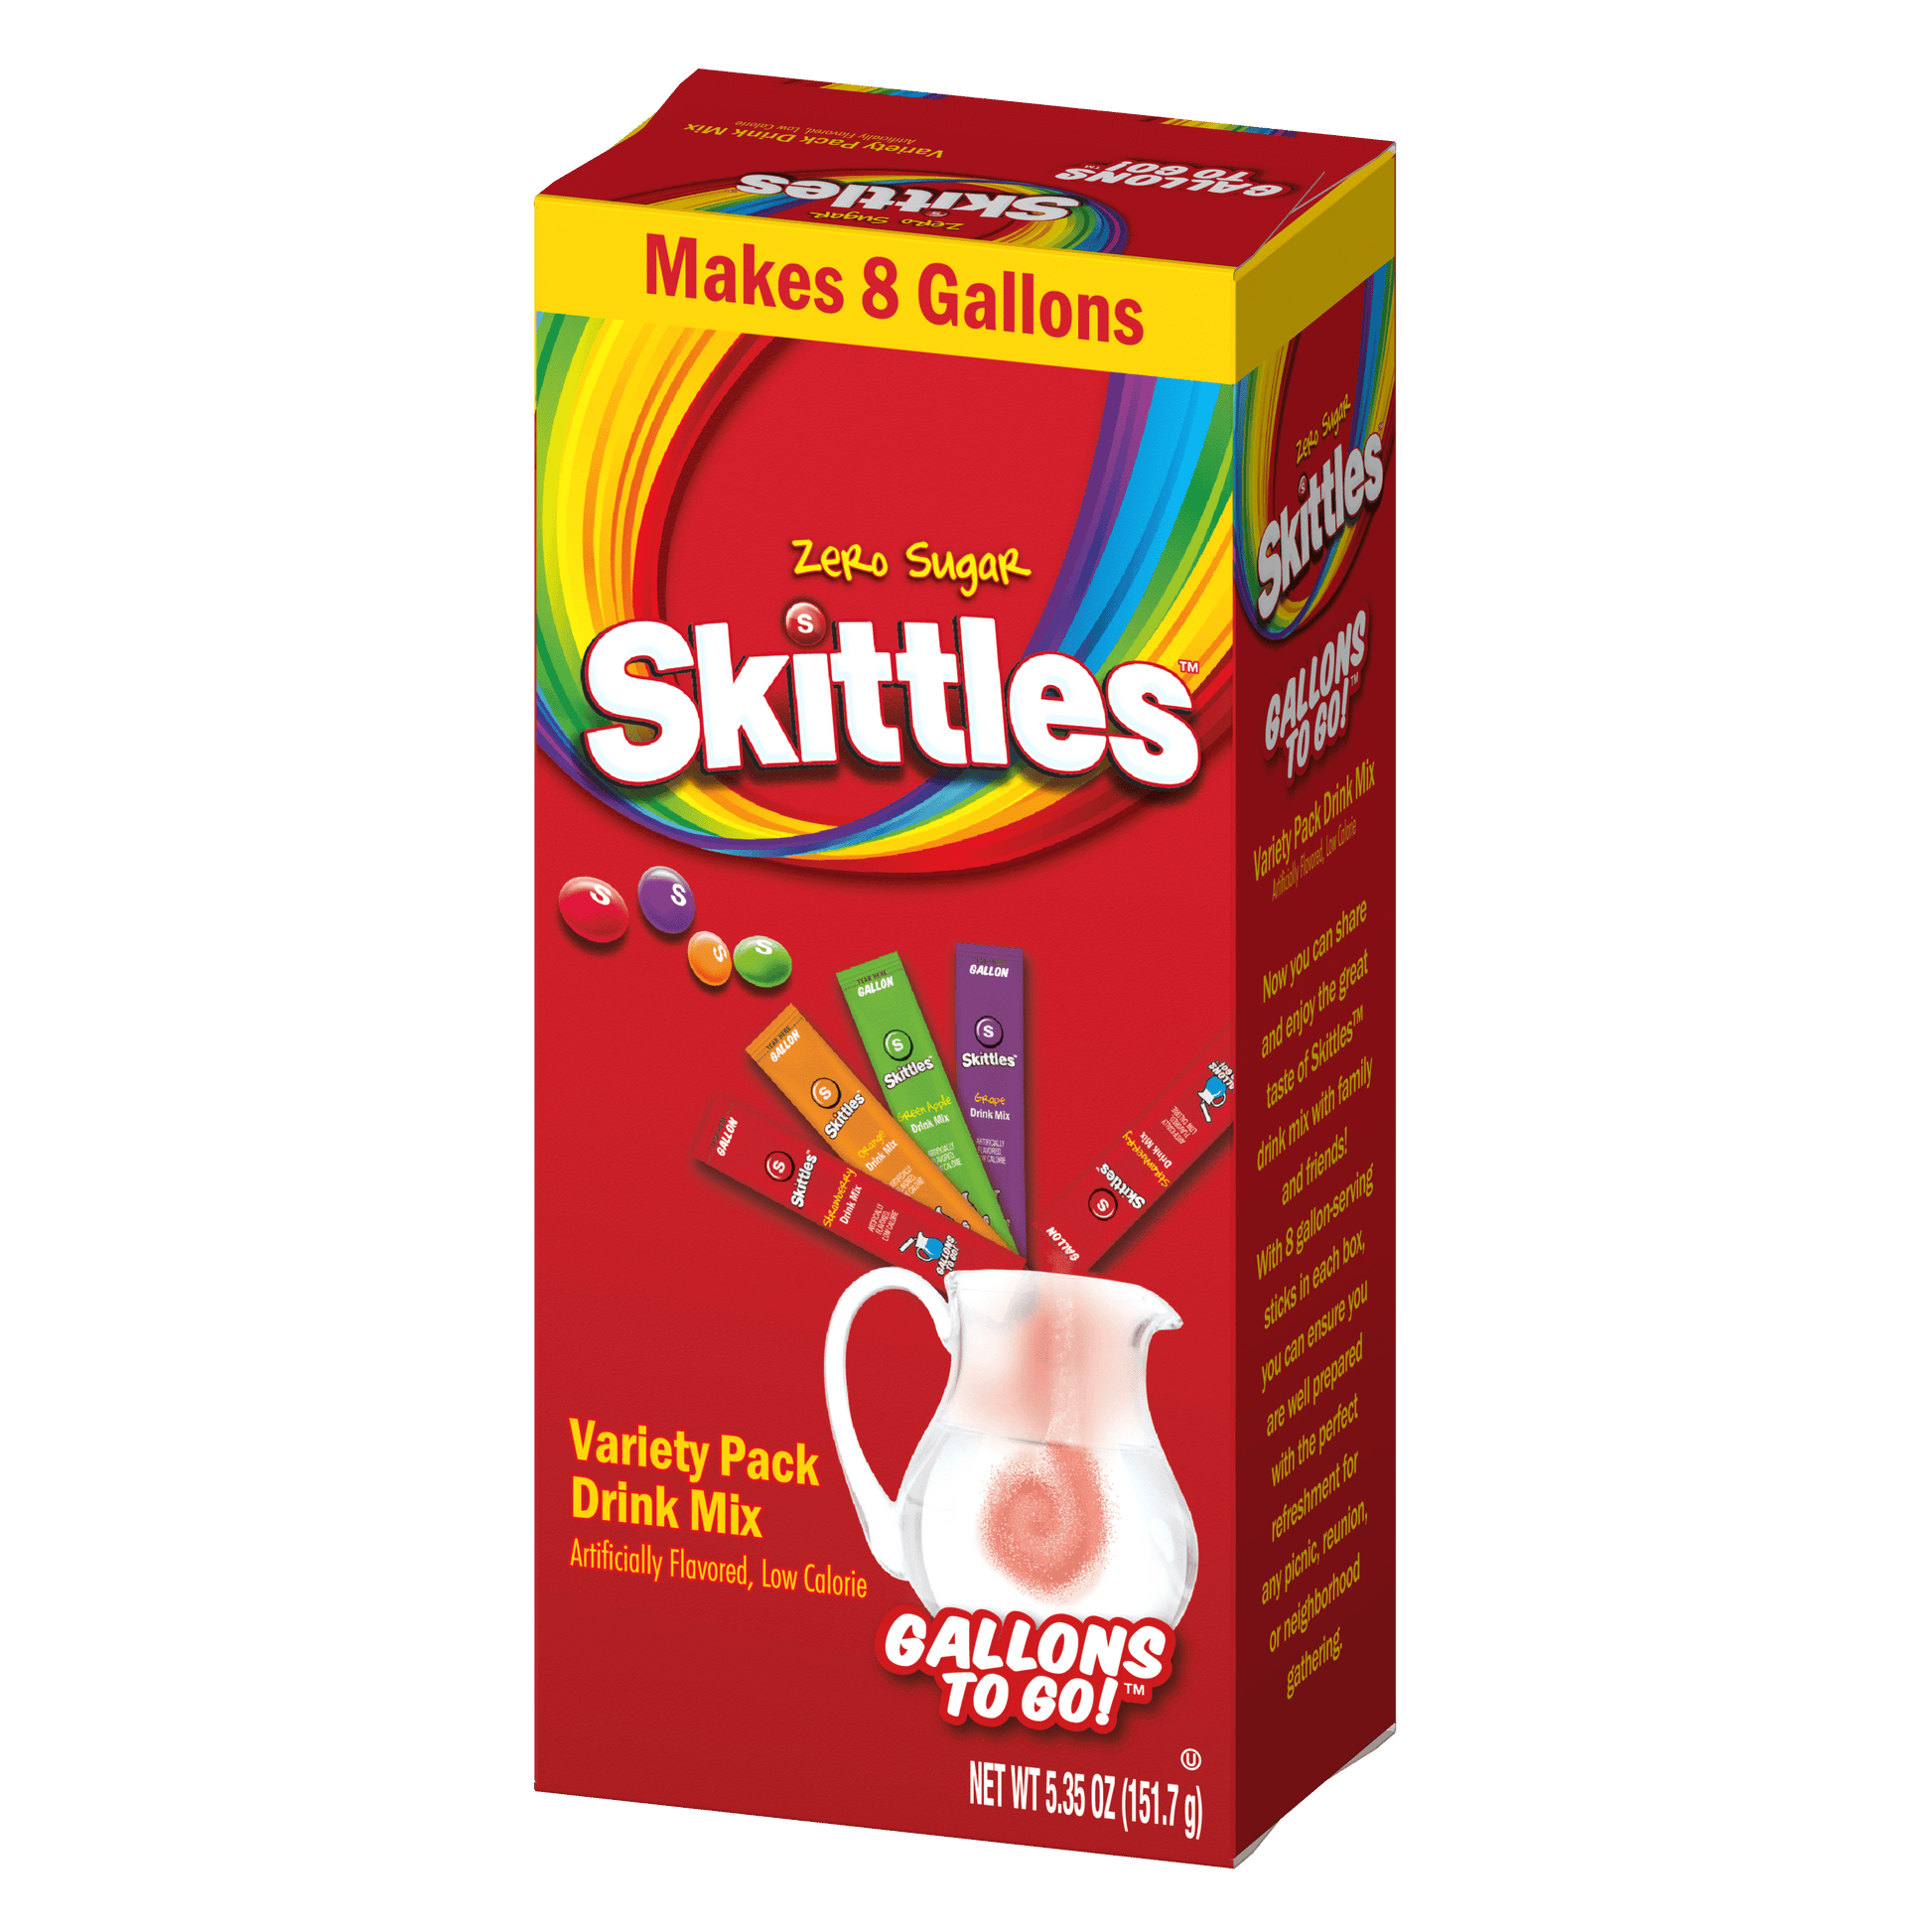 Skittles variety pack gallons to go